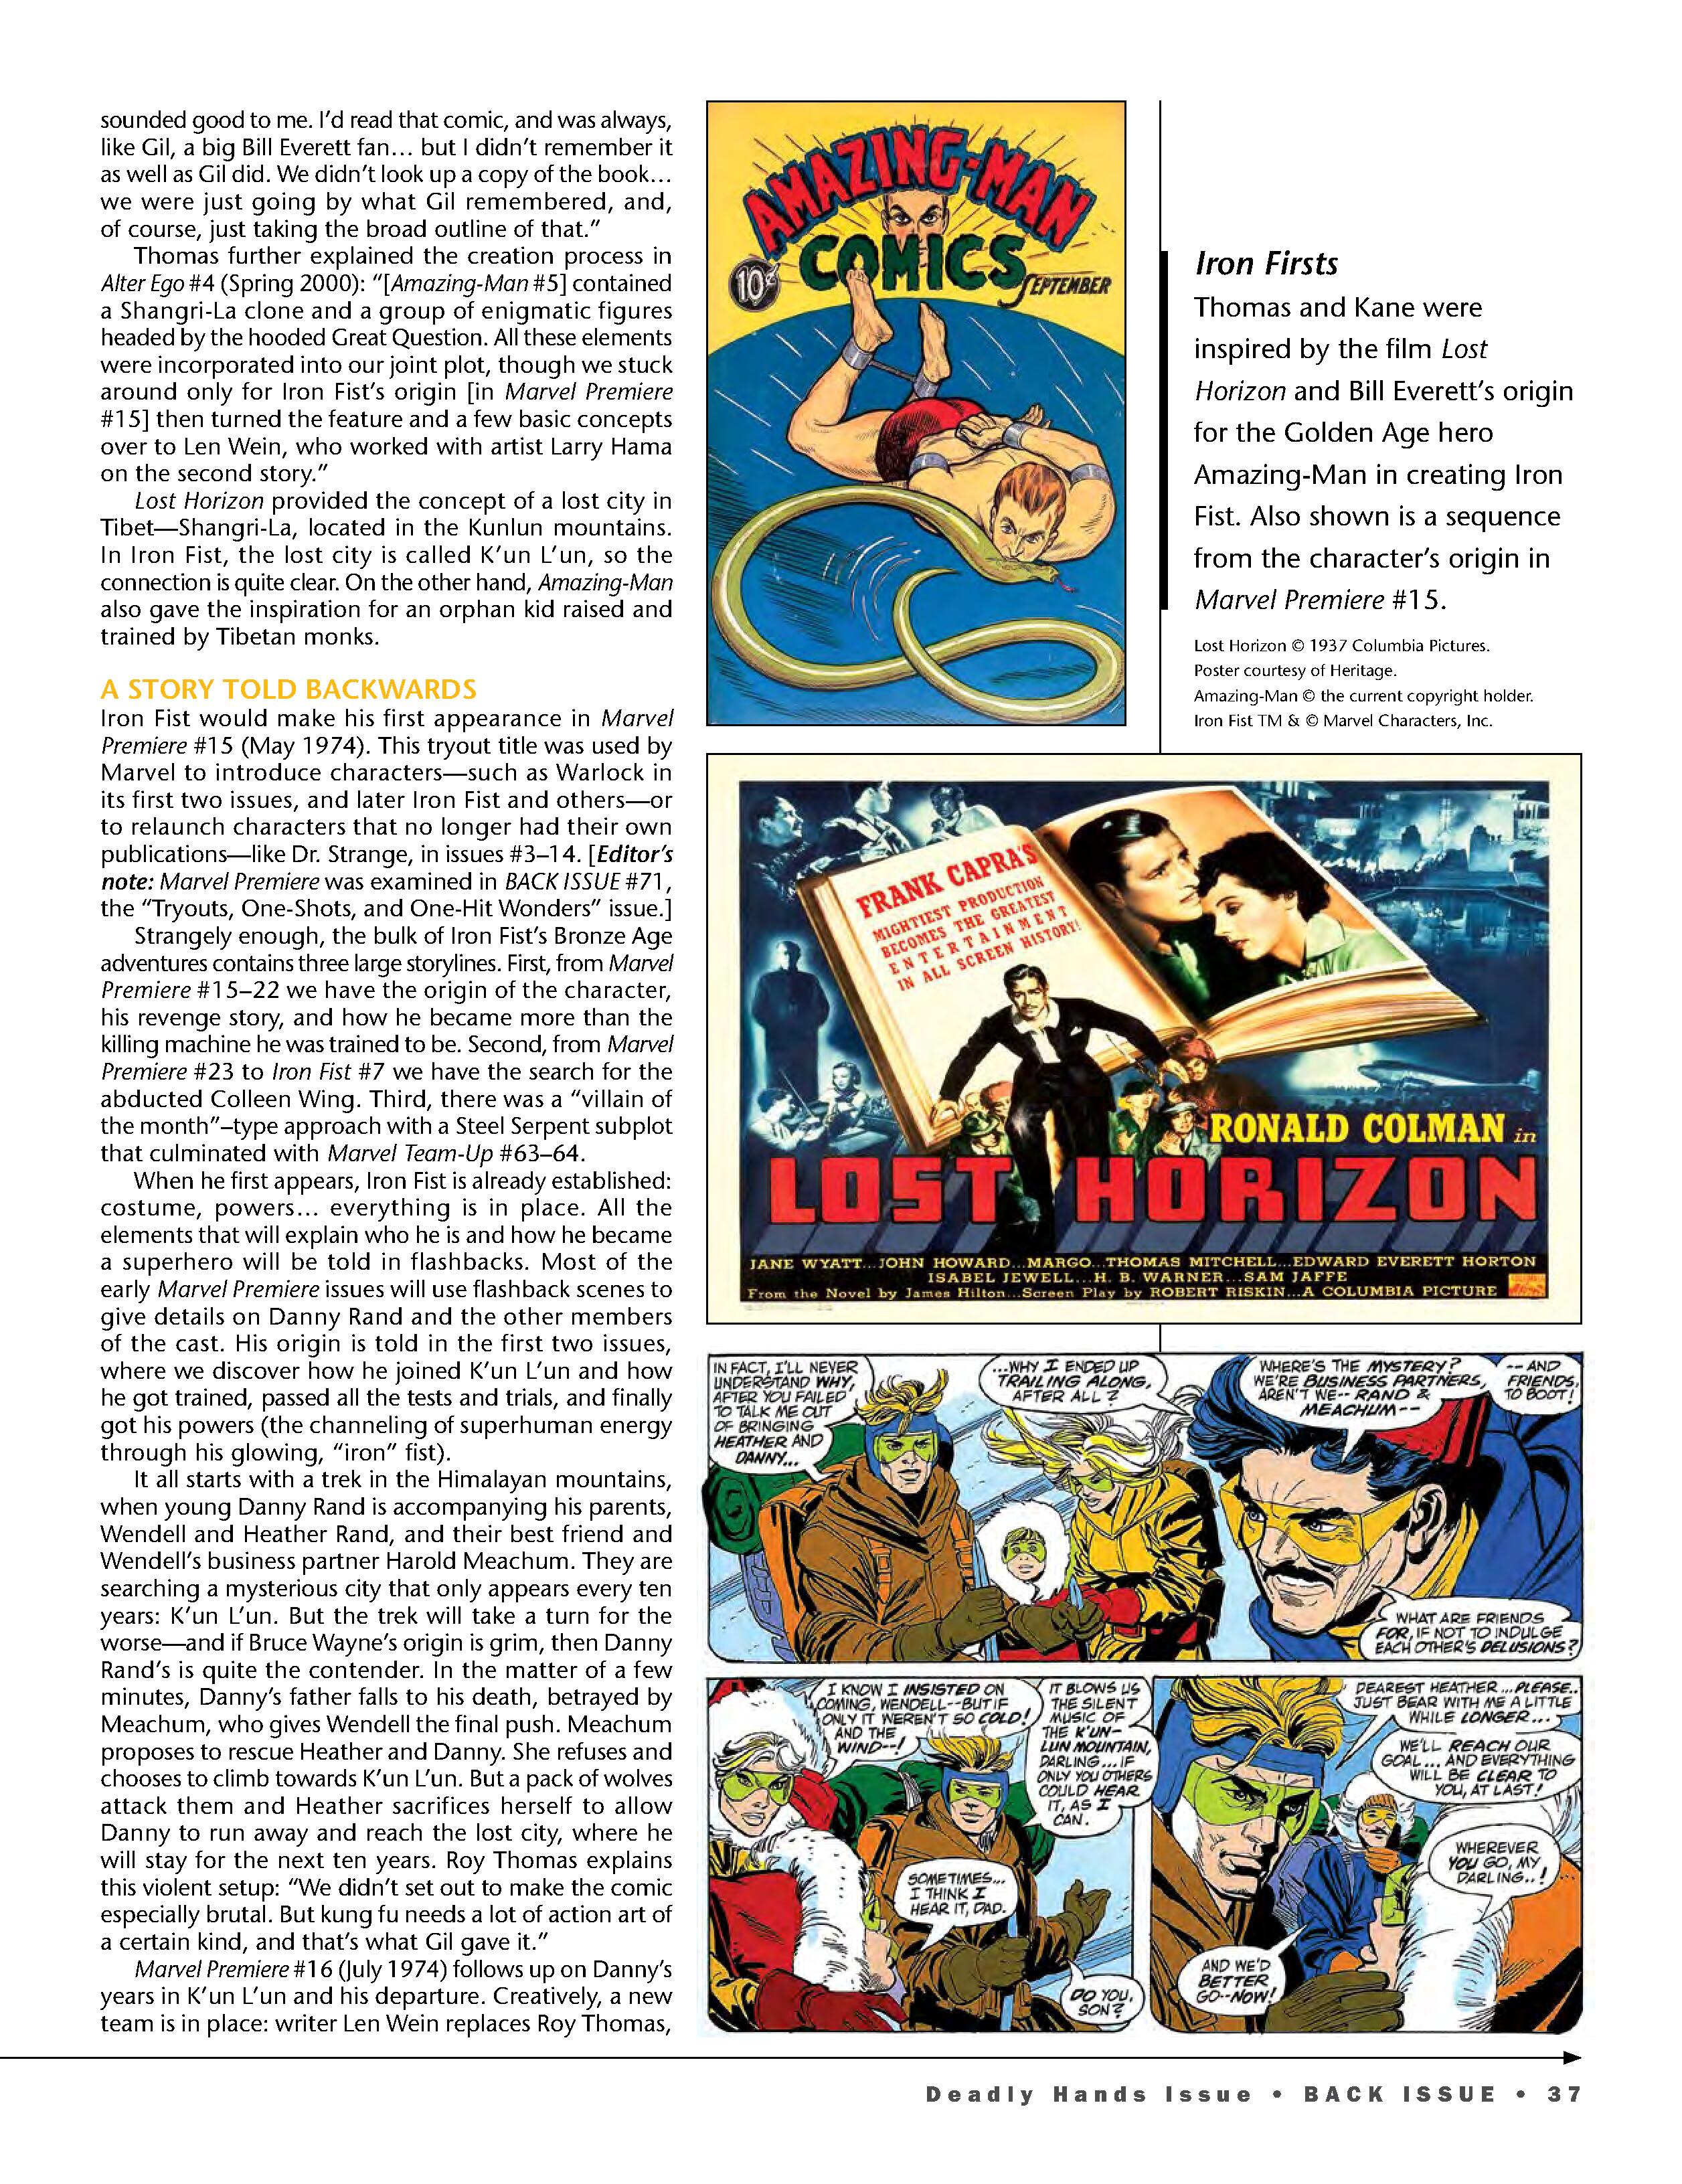 Read online Back Issue comic -  Issue #105 - 39